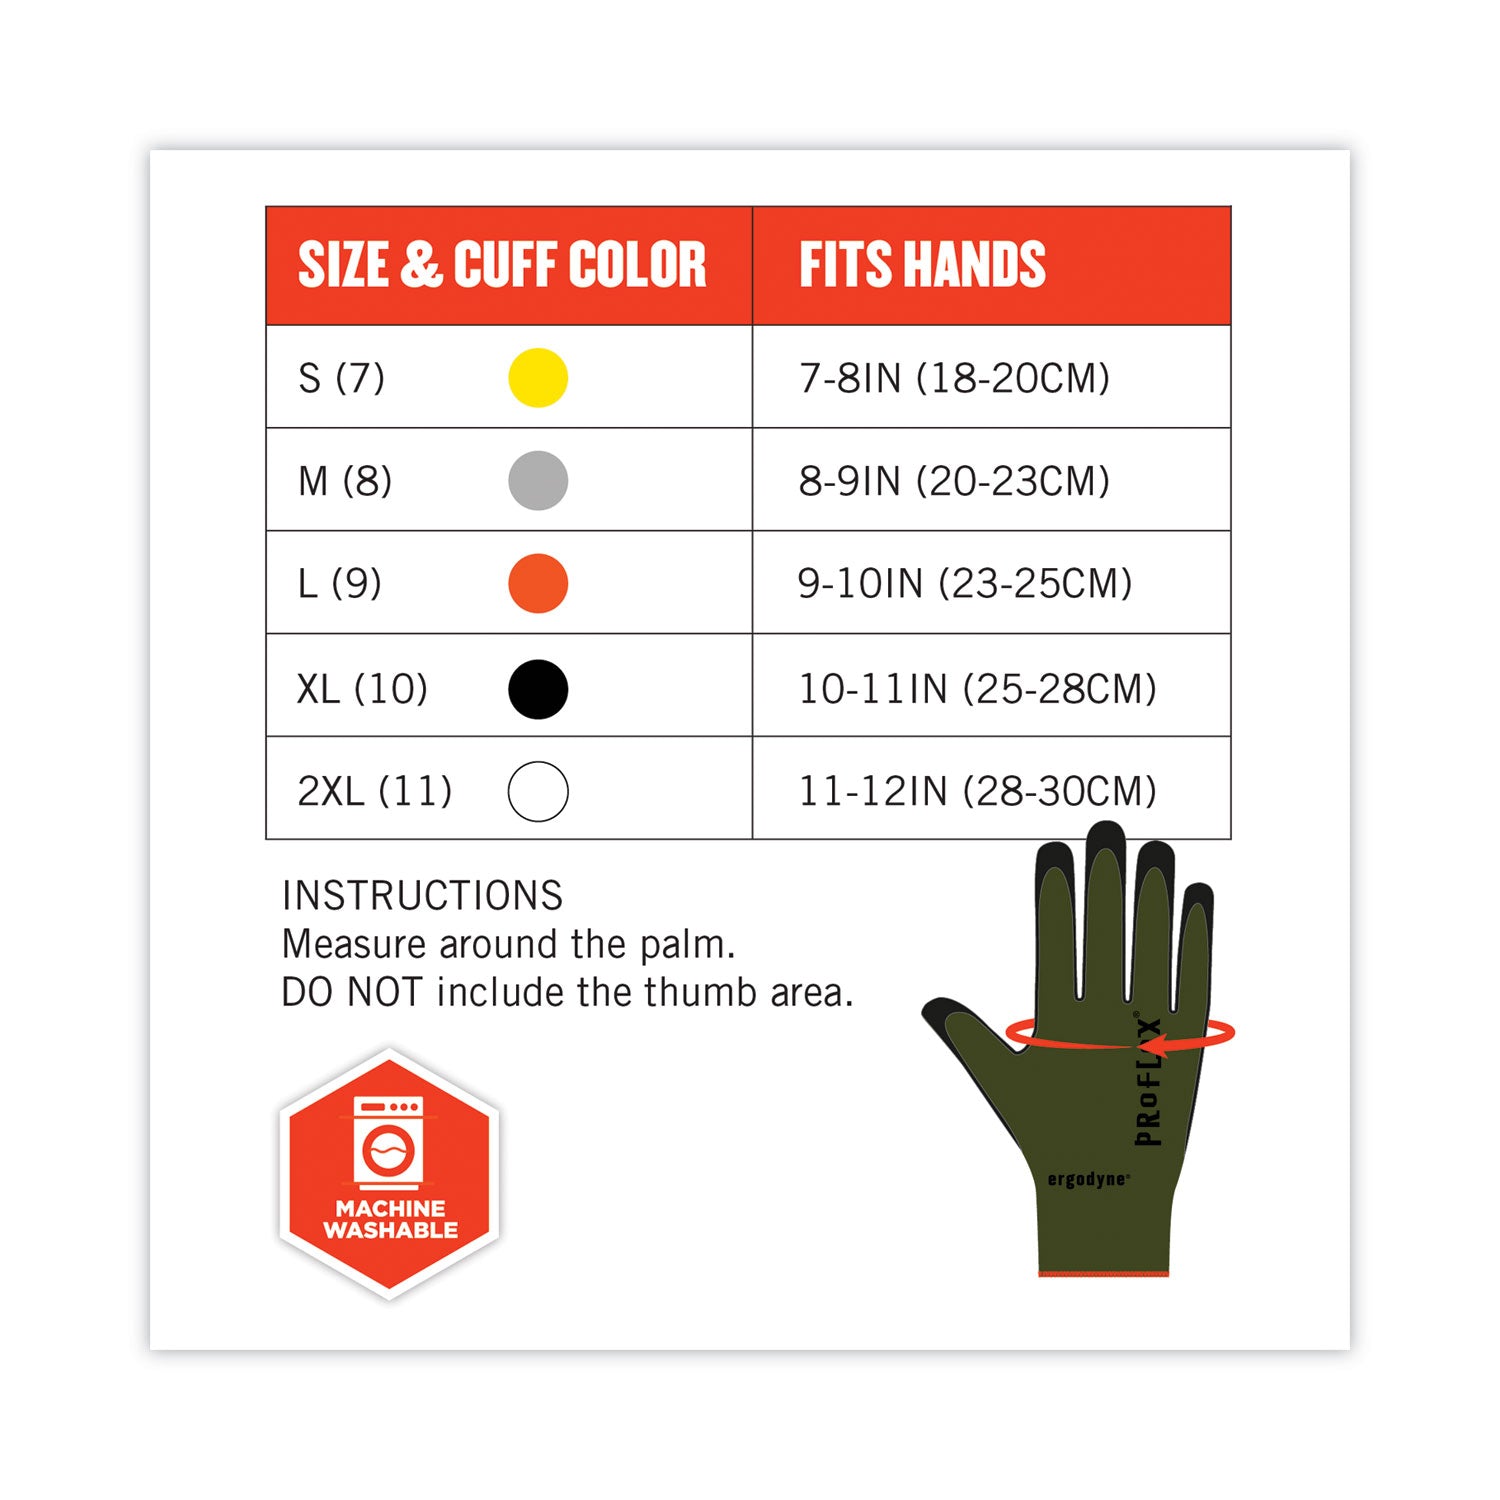 proflex-7042-ansi-a4-nitrile-coated-cr-gloves-green-small-pair-ships-in-1-3-business-days_ego10342 - 4